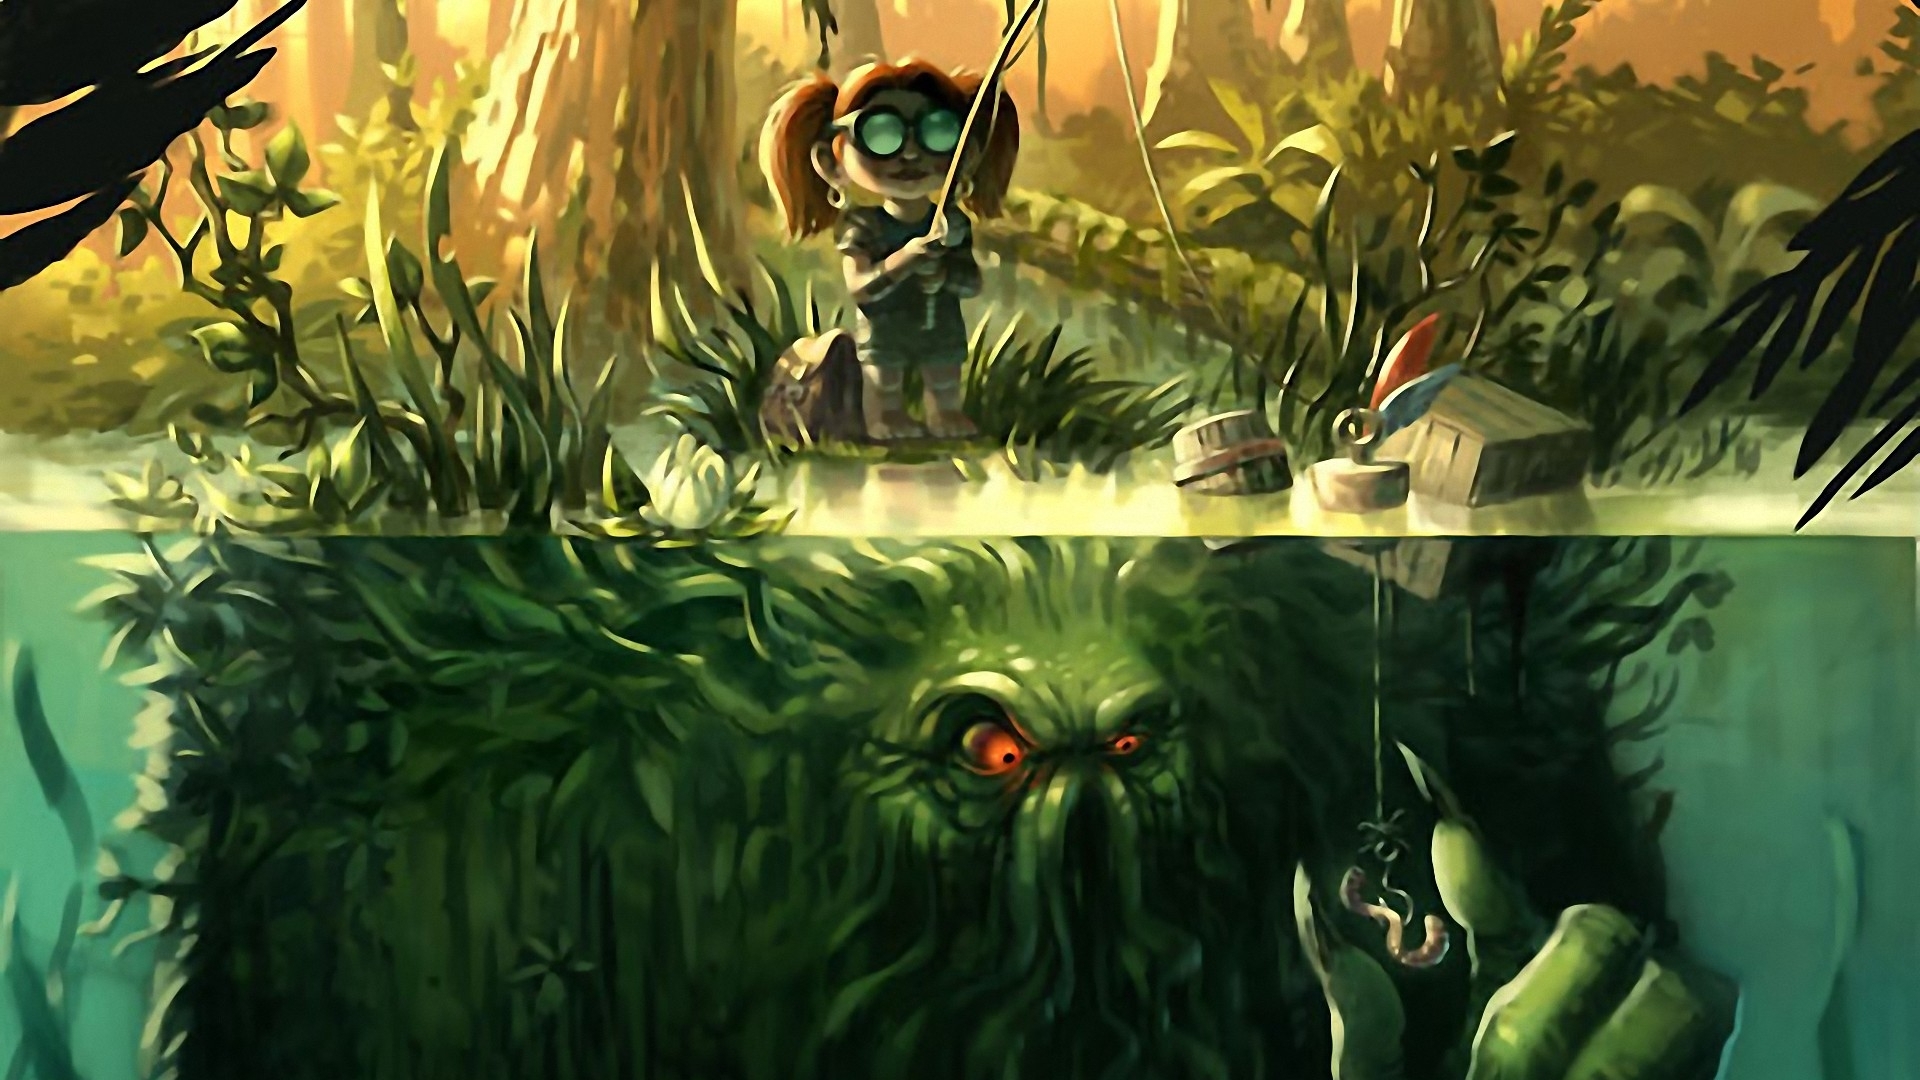 World of warcraft wallpaper gnome on top of large bog beast